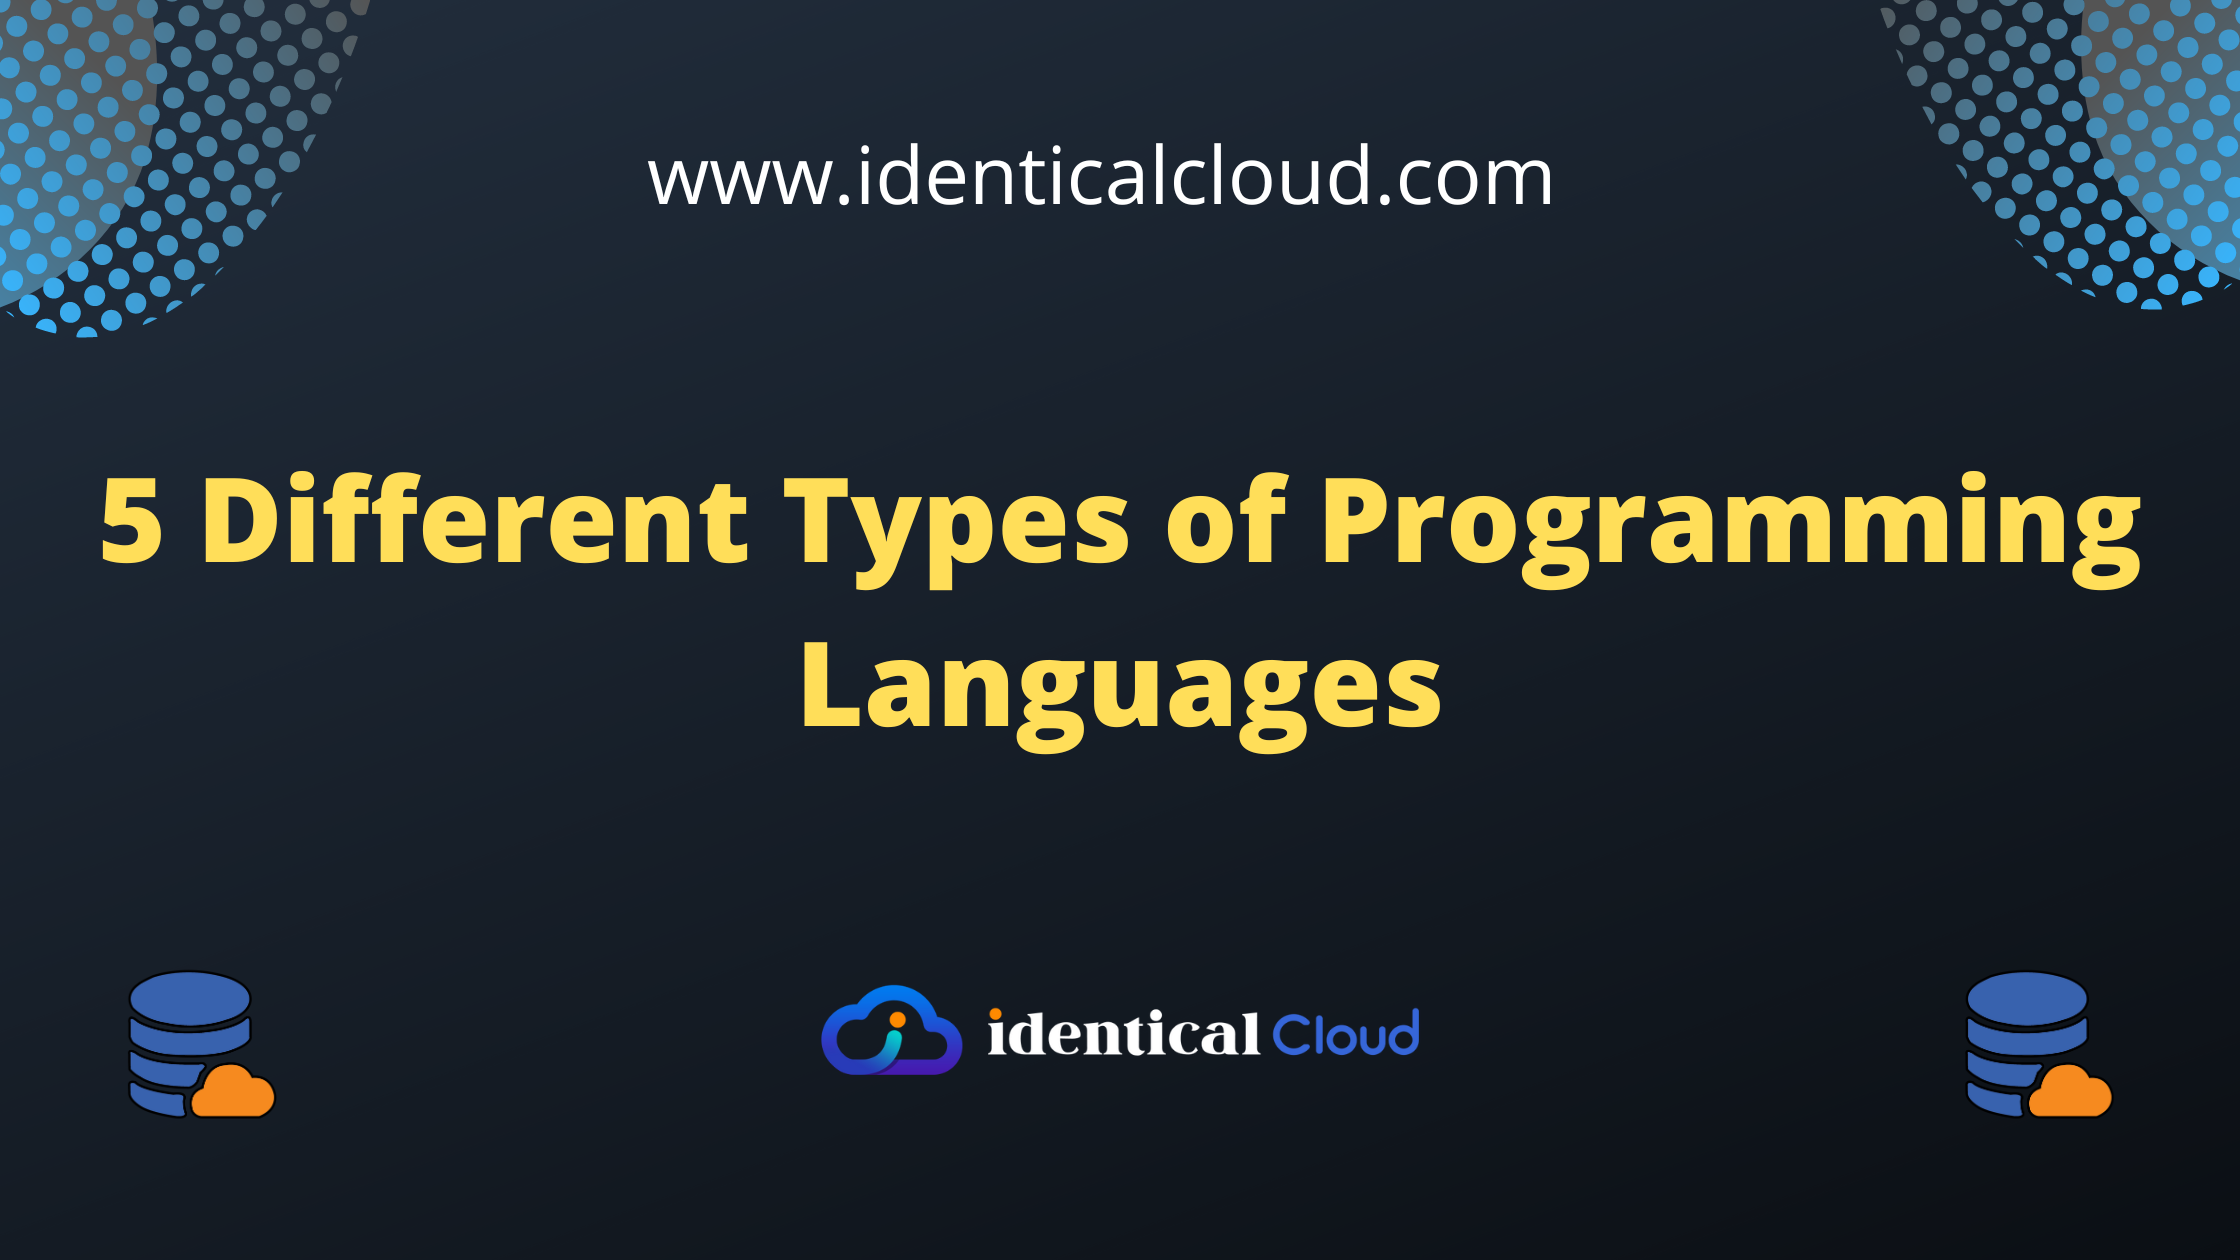 5 Different Types of Programming Languages